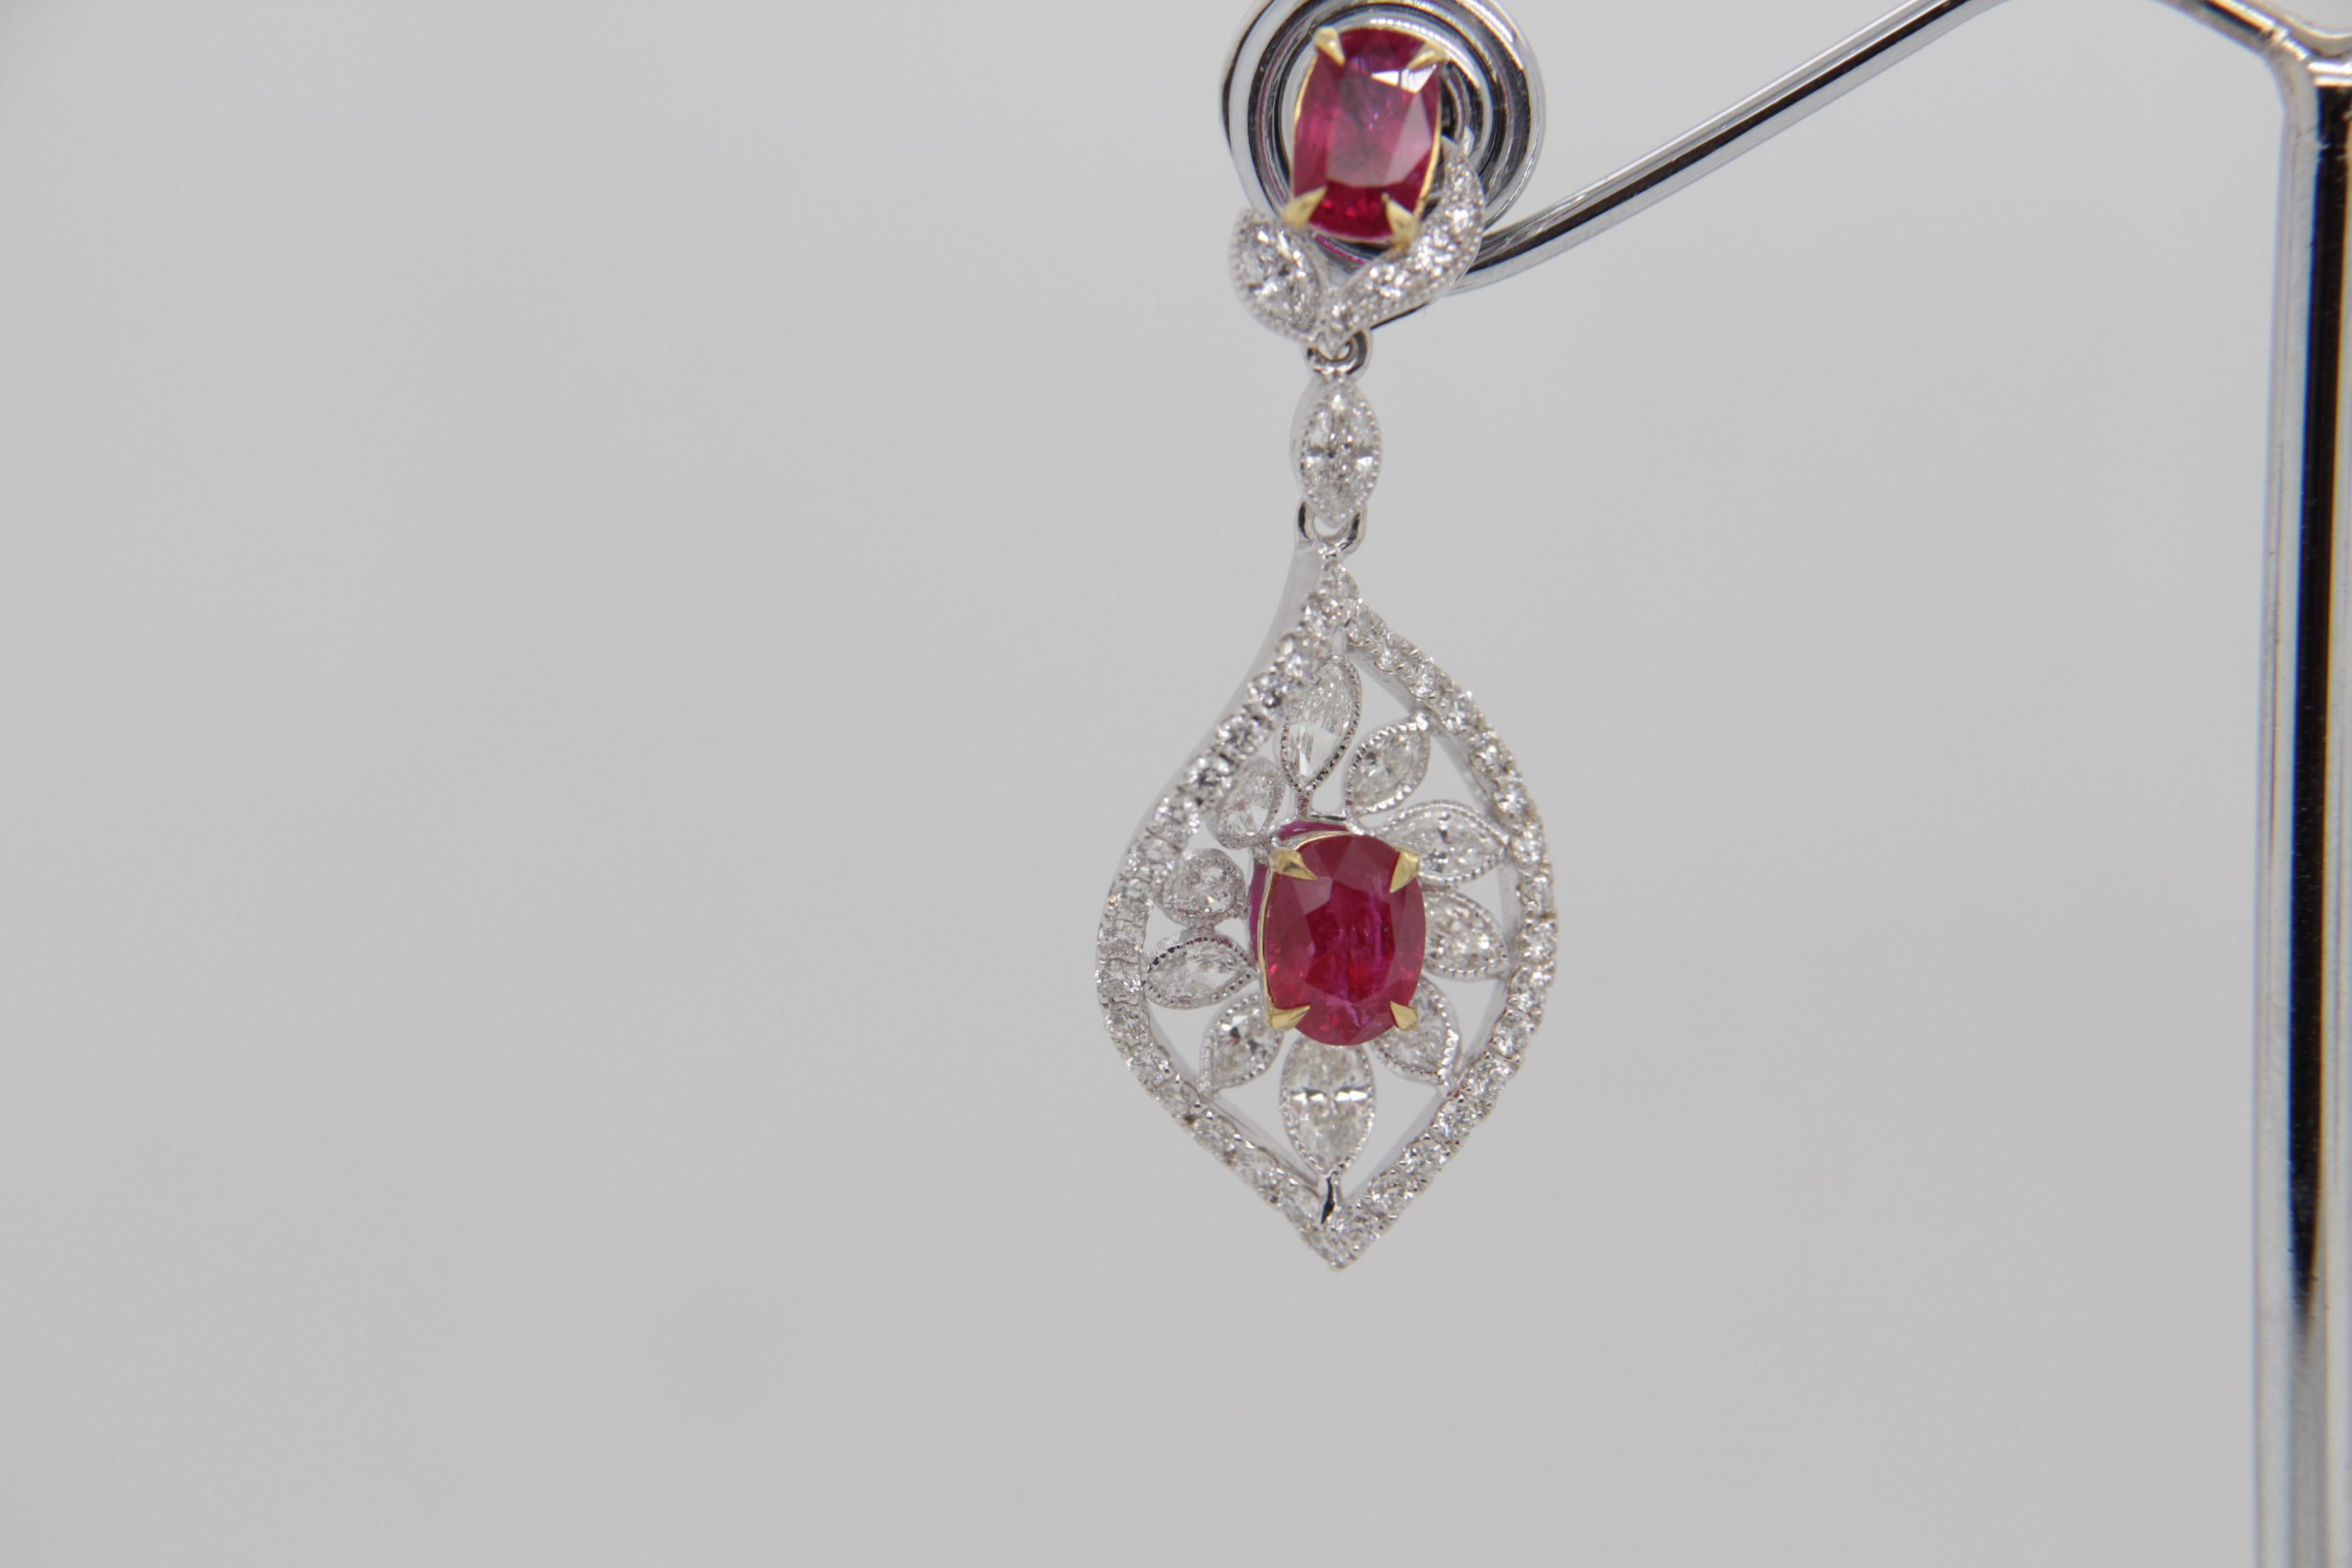 A brand new handcrafted ruby earring by Rewa Jewels. The earring’s center stones weigh 1.13ct and 0.79ct, are of Burmese origin and certified by Gem Research Swisslab (GRS) as natural, unheated, 'Pigeon blood' with certificate numbers 2022-010524